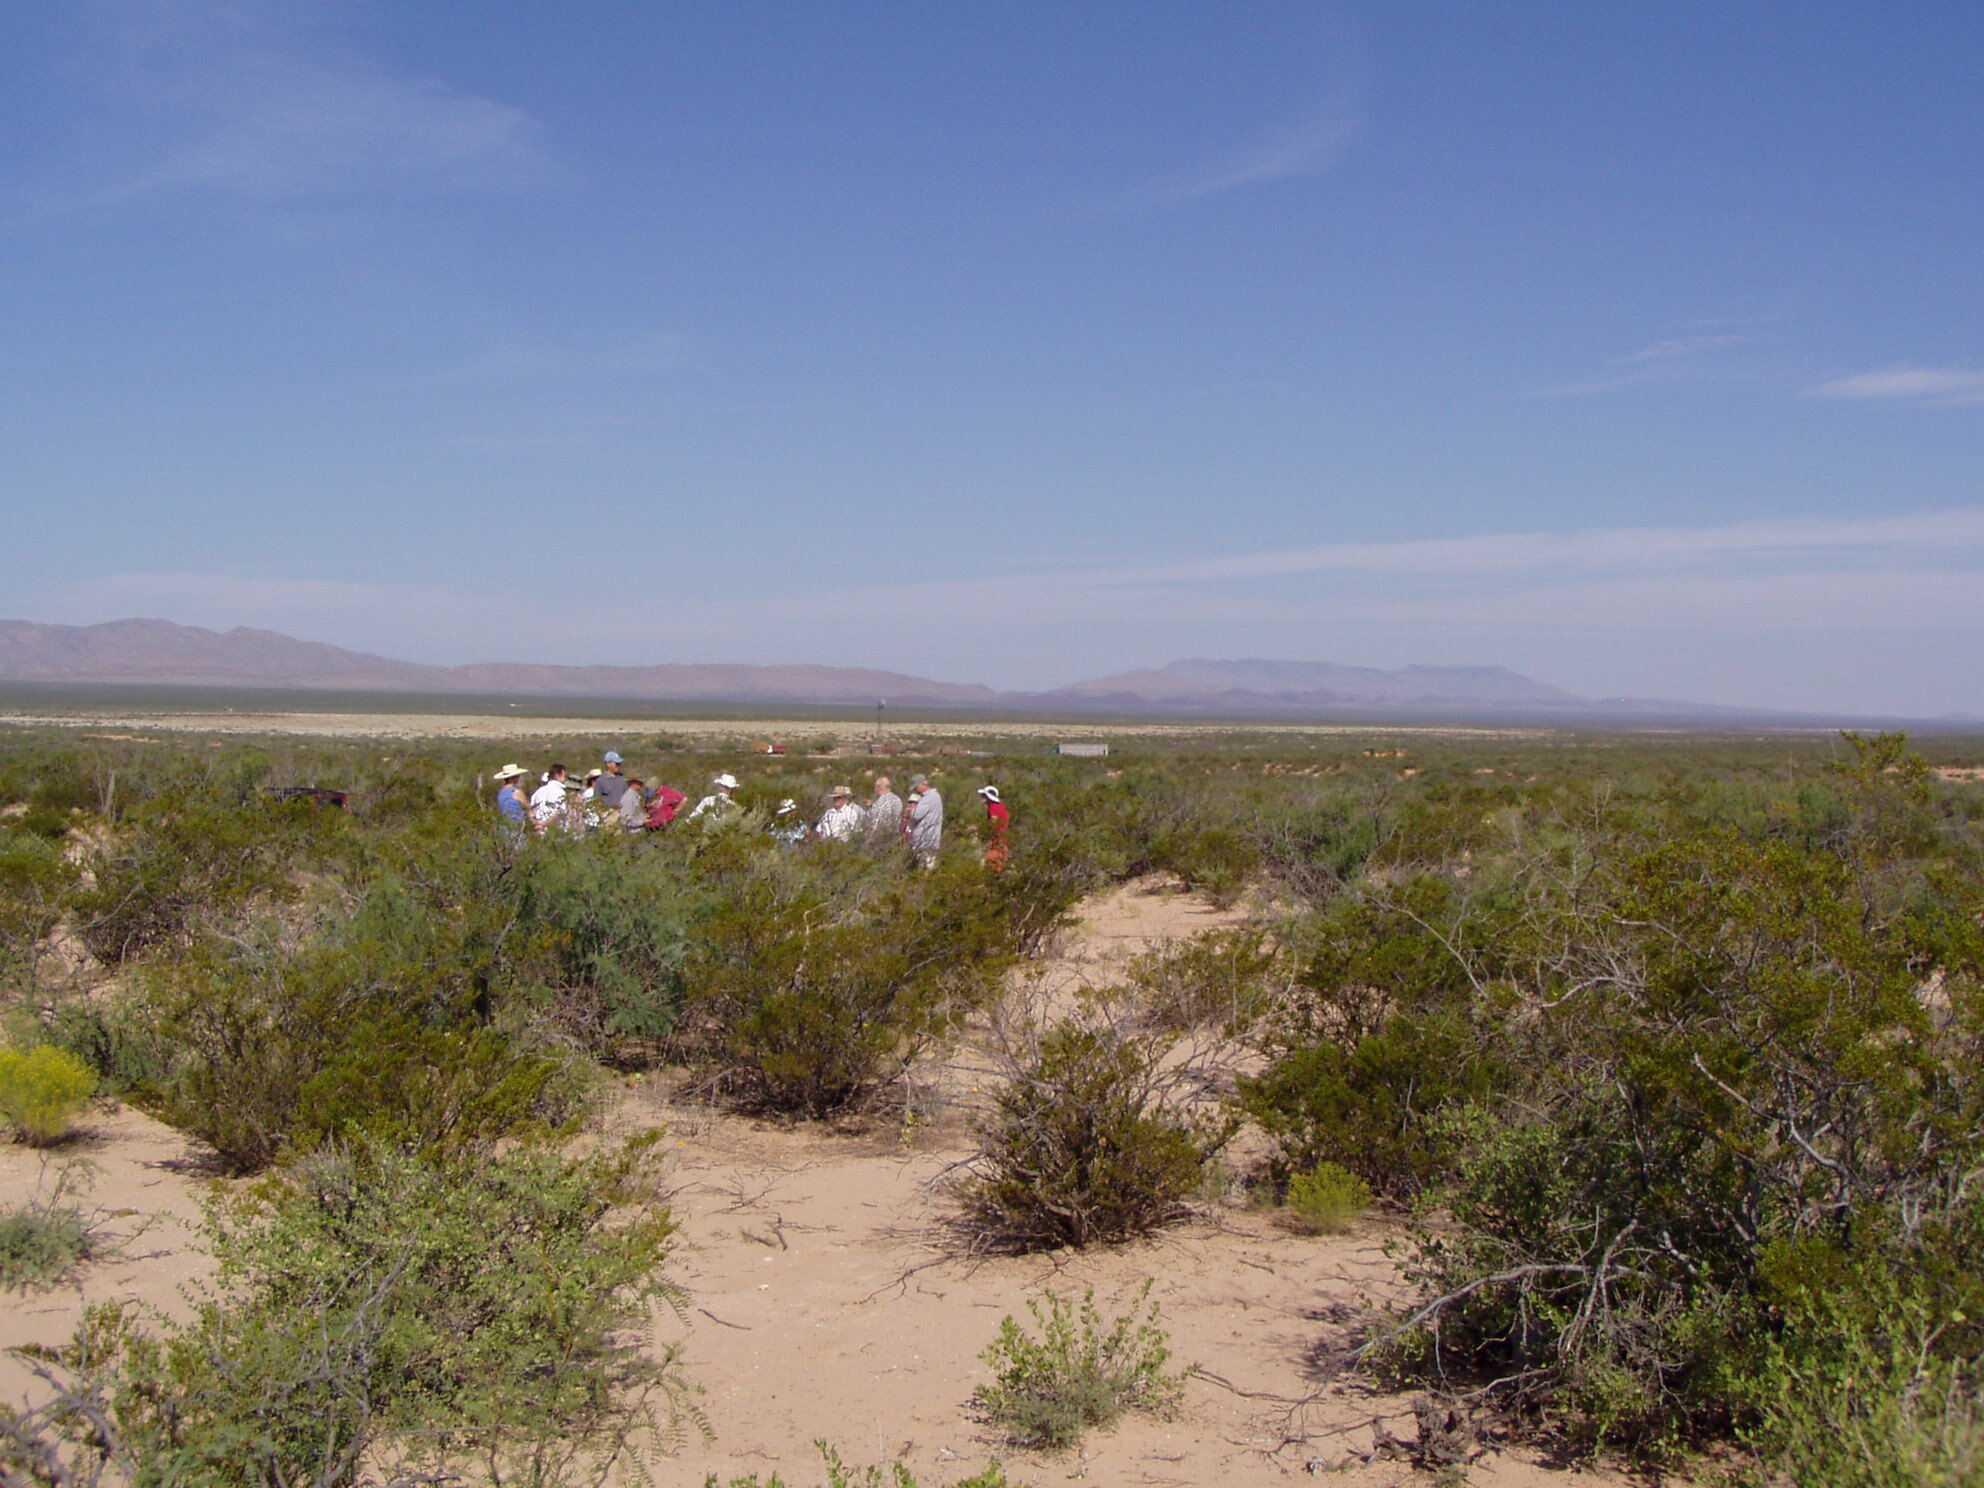 A group studies the environment at the Jornada del Muerto trail in Sierra County, NM